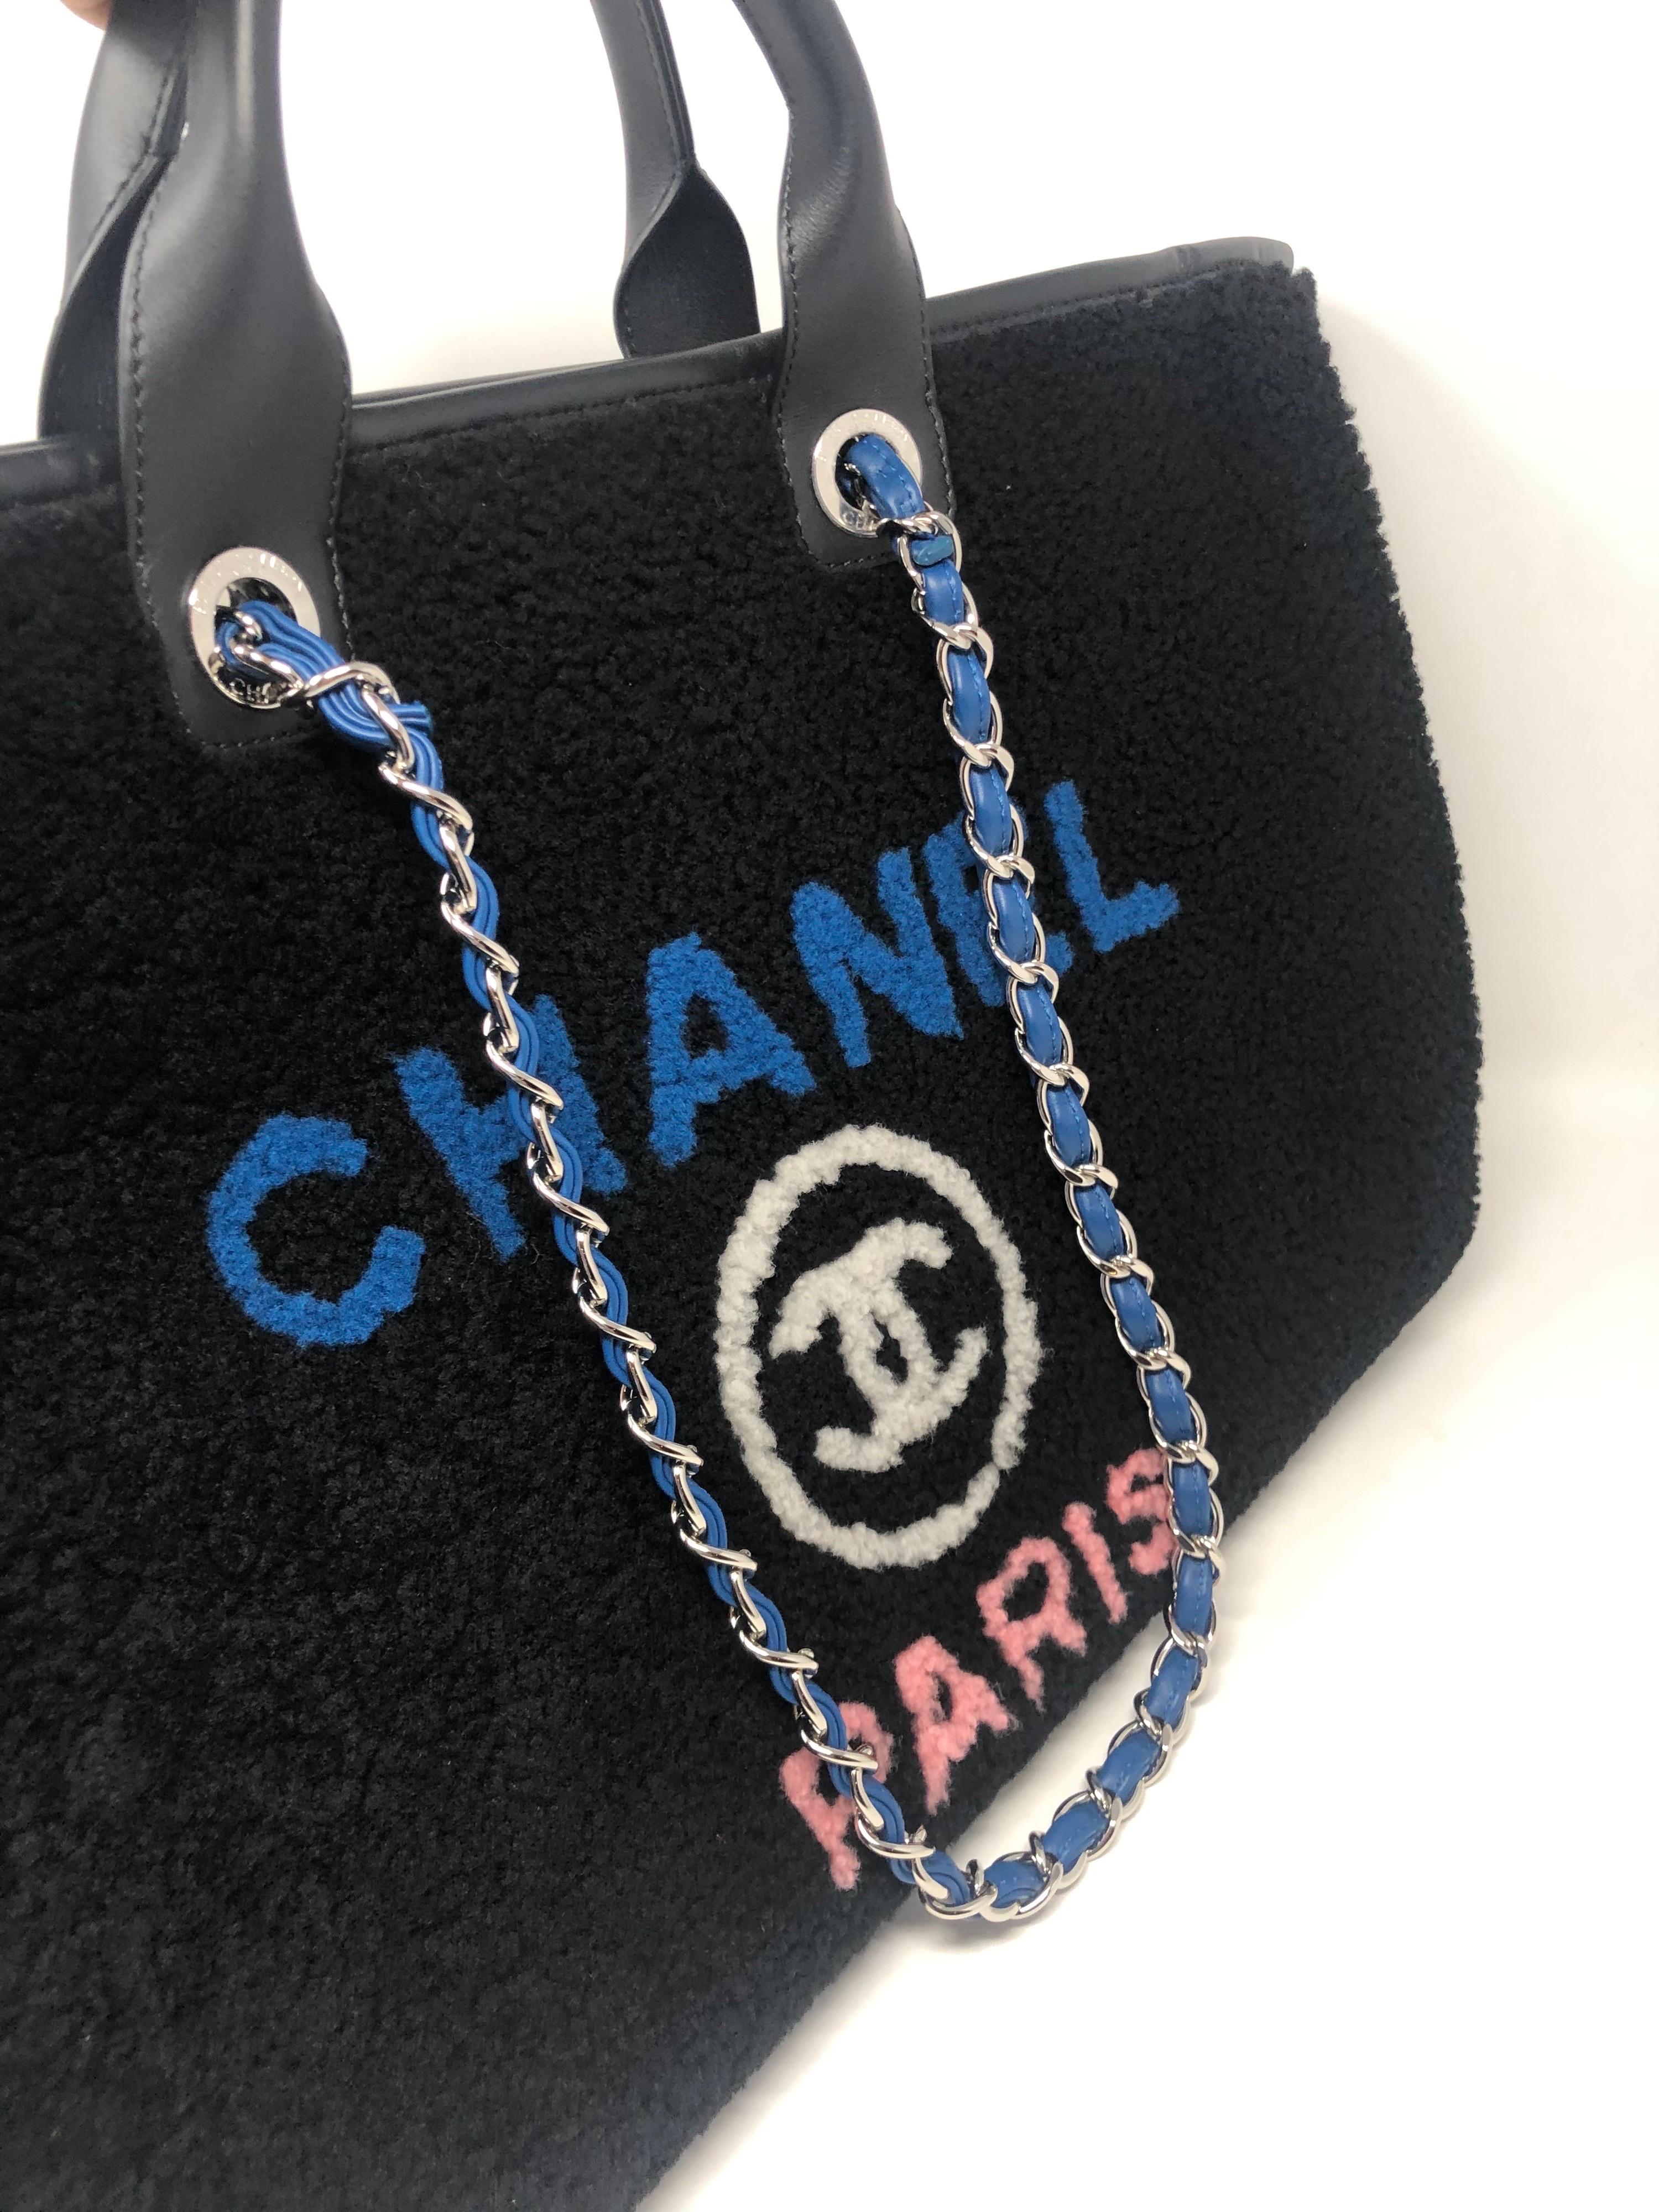 Black Chanel Shearling Deauville X Large Tote Bag 